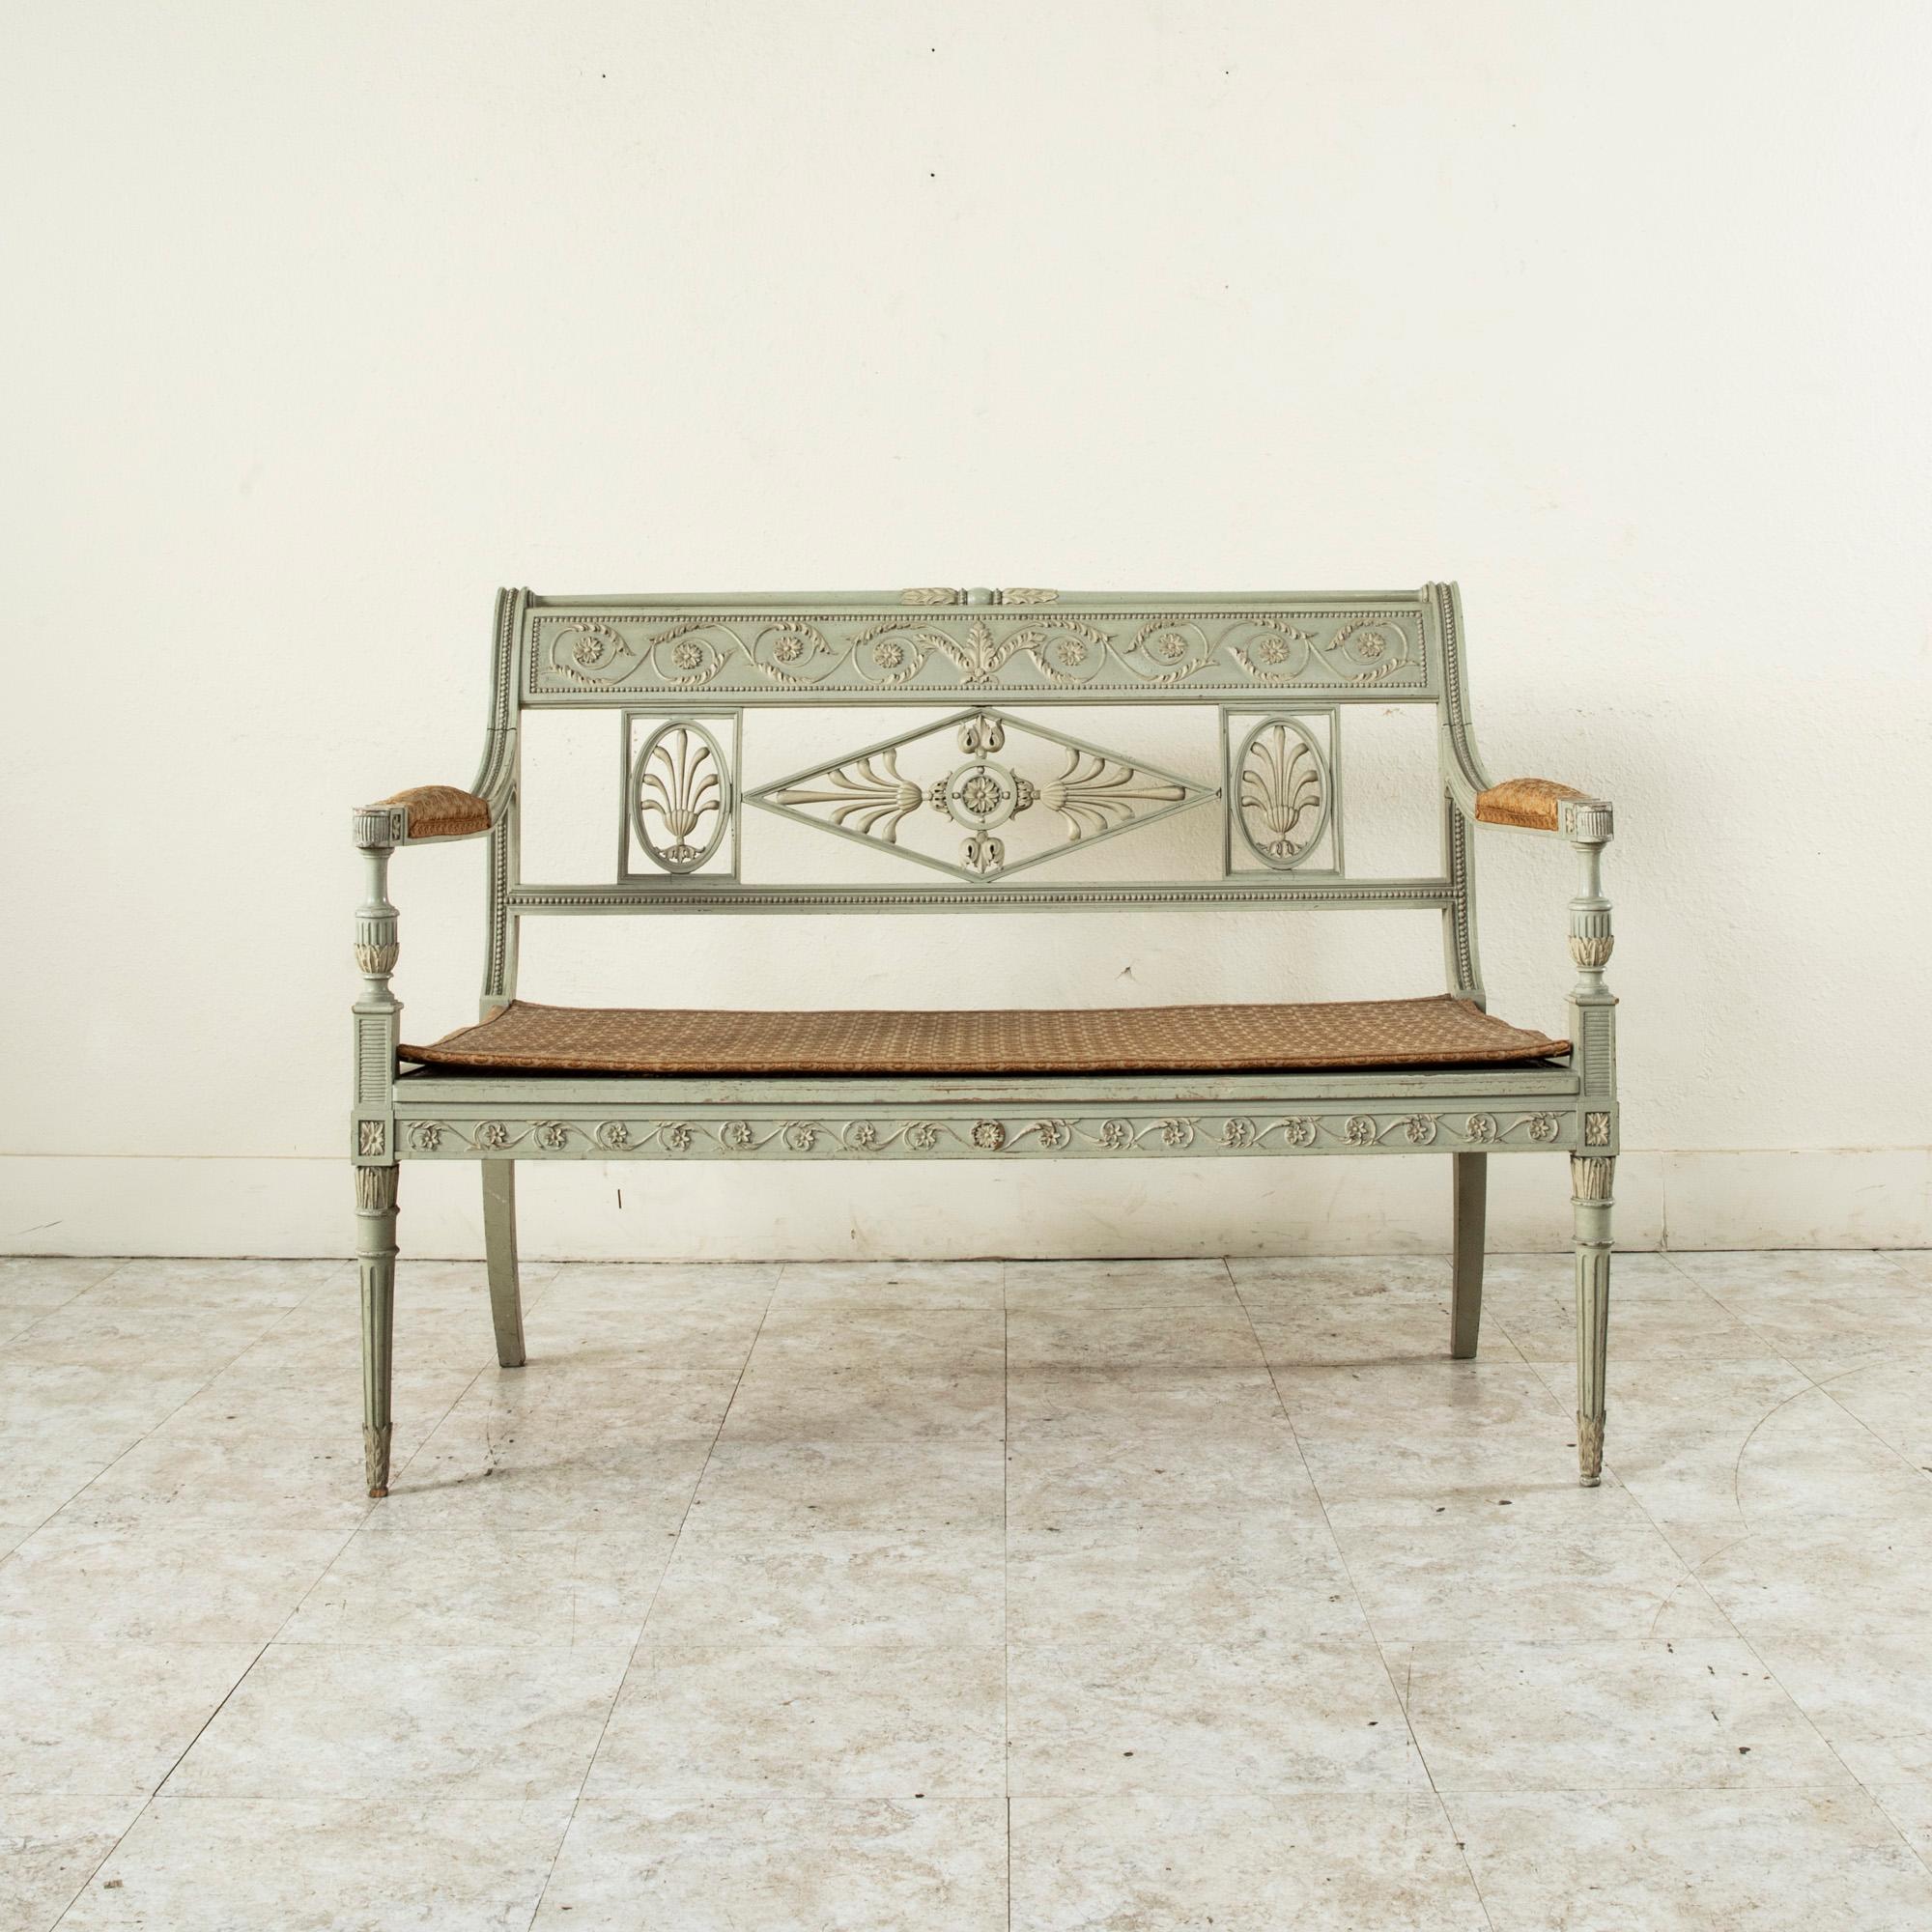 Early 20th Century French Directoire Style Painted Ash Banquette, Settee In Good Condition For Sale In Fayetteville, AR